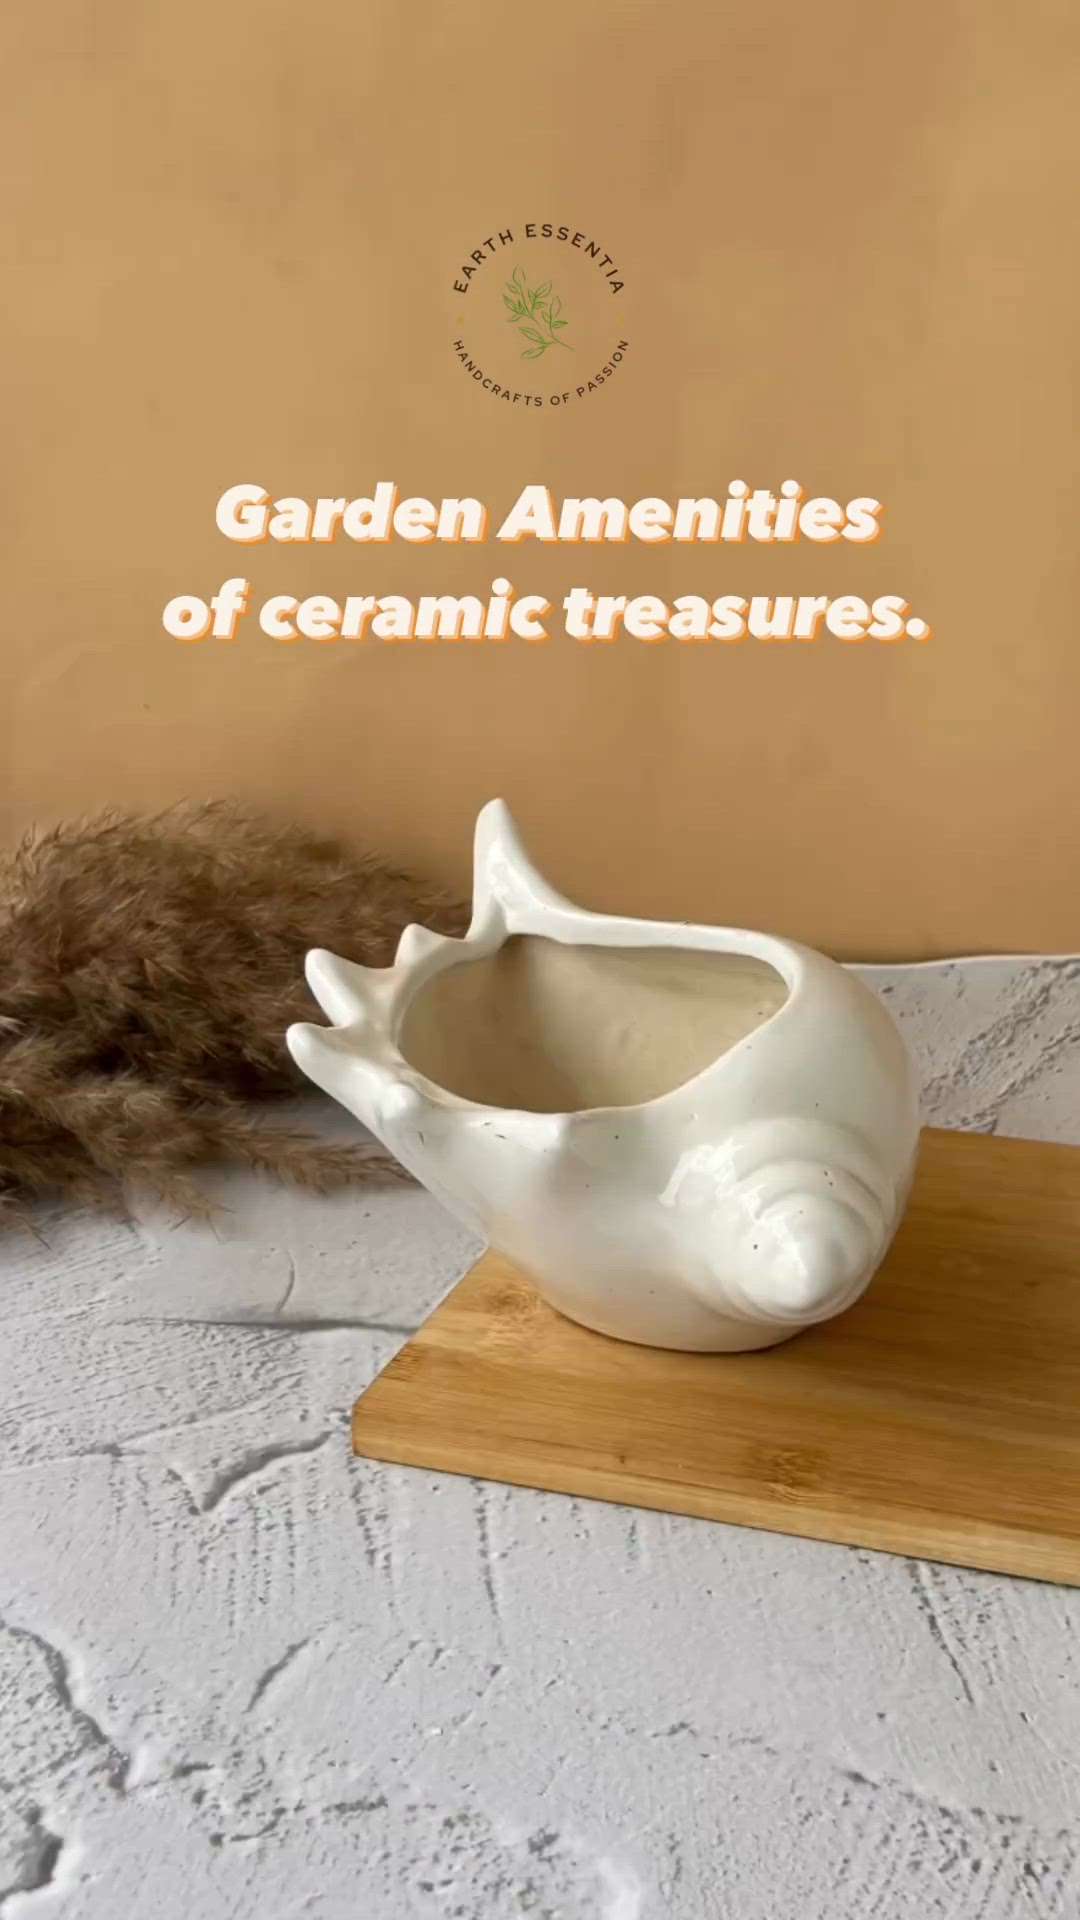 Flourish in artistry, thrive in ceramic planters.
A wide collection of handmade ceramic planters for sustainable planting

Crafted with ❤️
#earthessentia #planters #plants #homedecor #pottery #houseplants #plant #flowers #decor #nature #ceramics #plantlife #gardendesign #gardendecor #handmade #ceramicpot #ceramicplanter #decorshopping